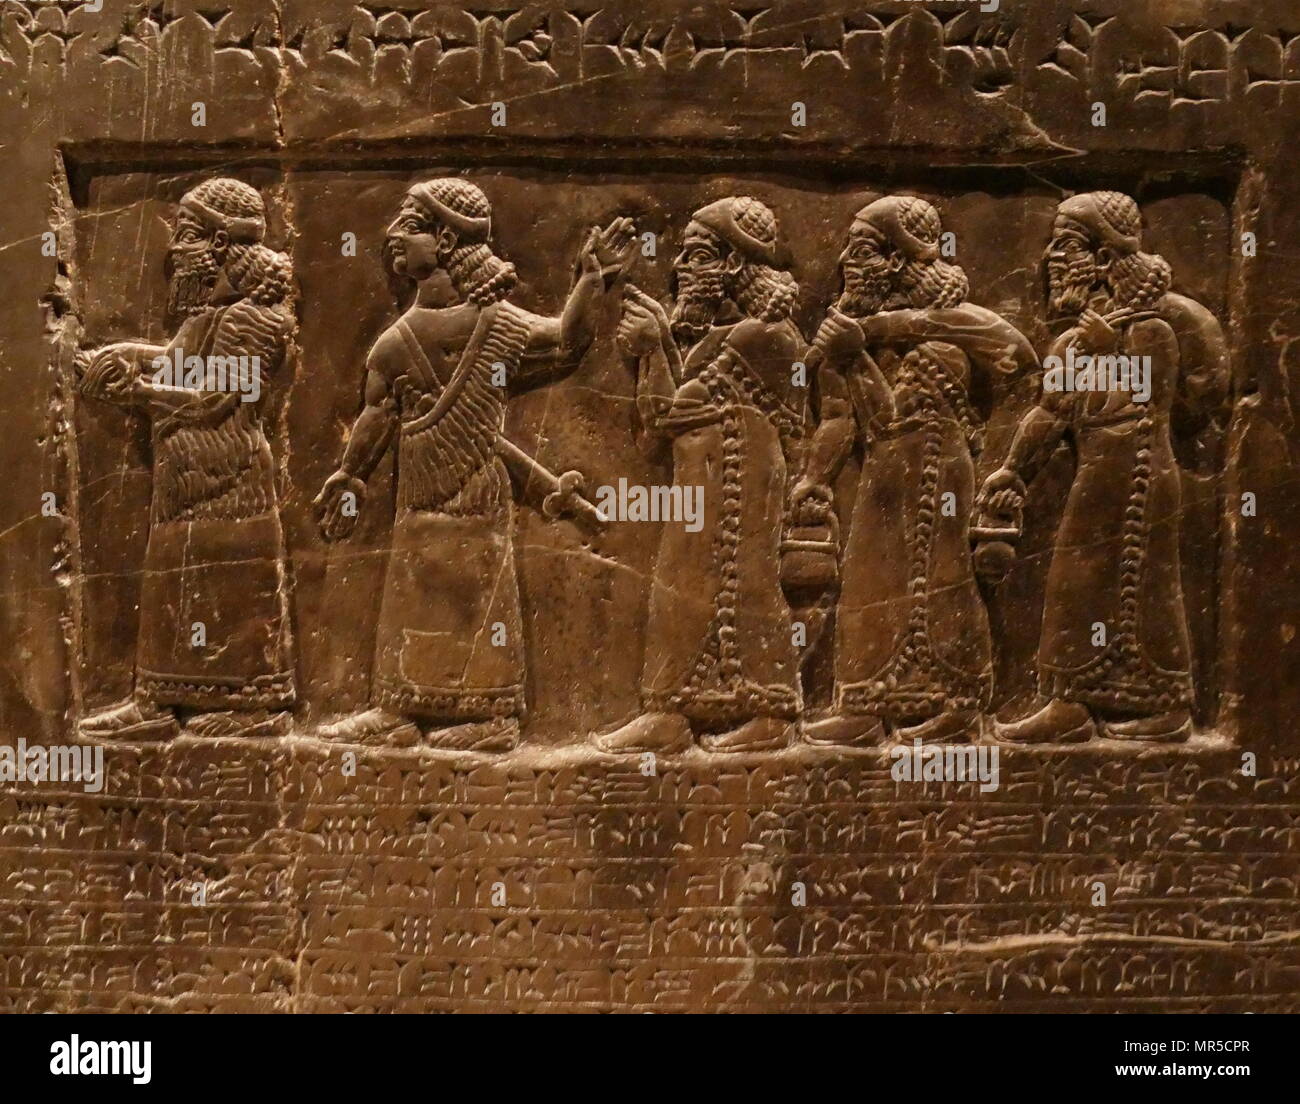 Detail from the Black Obelisk, of Shalmaneser III. A black limestone Assyrian sculpture with scenes in bas-relief and inscriptions. It comes from Nimrud (ancient Kalhu), in northern Iraq, and commemorates the deeds of King Shalmaneser III (reigned 858-824 BC). Stock Photo